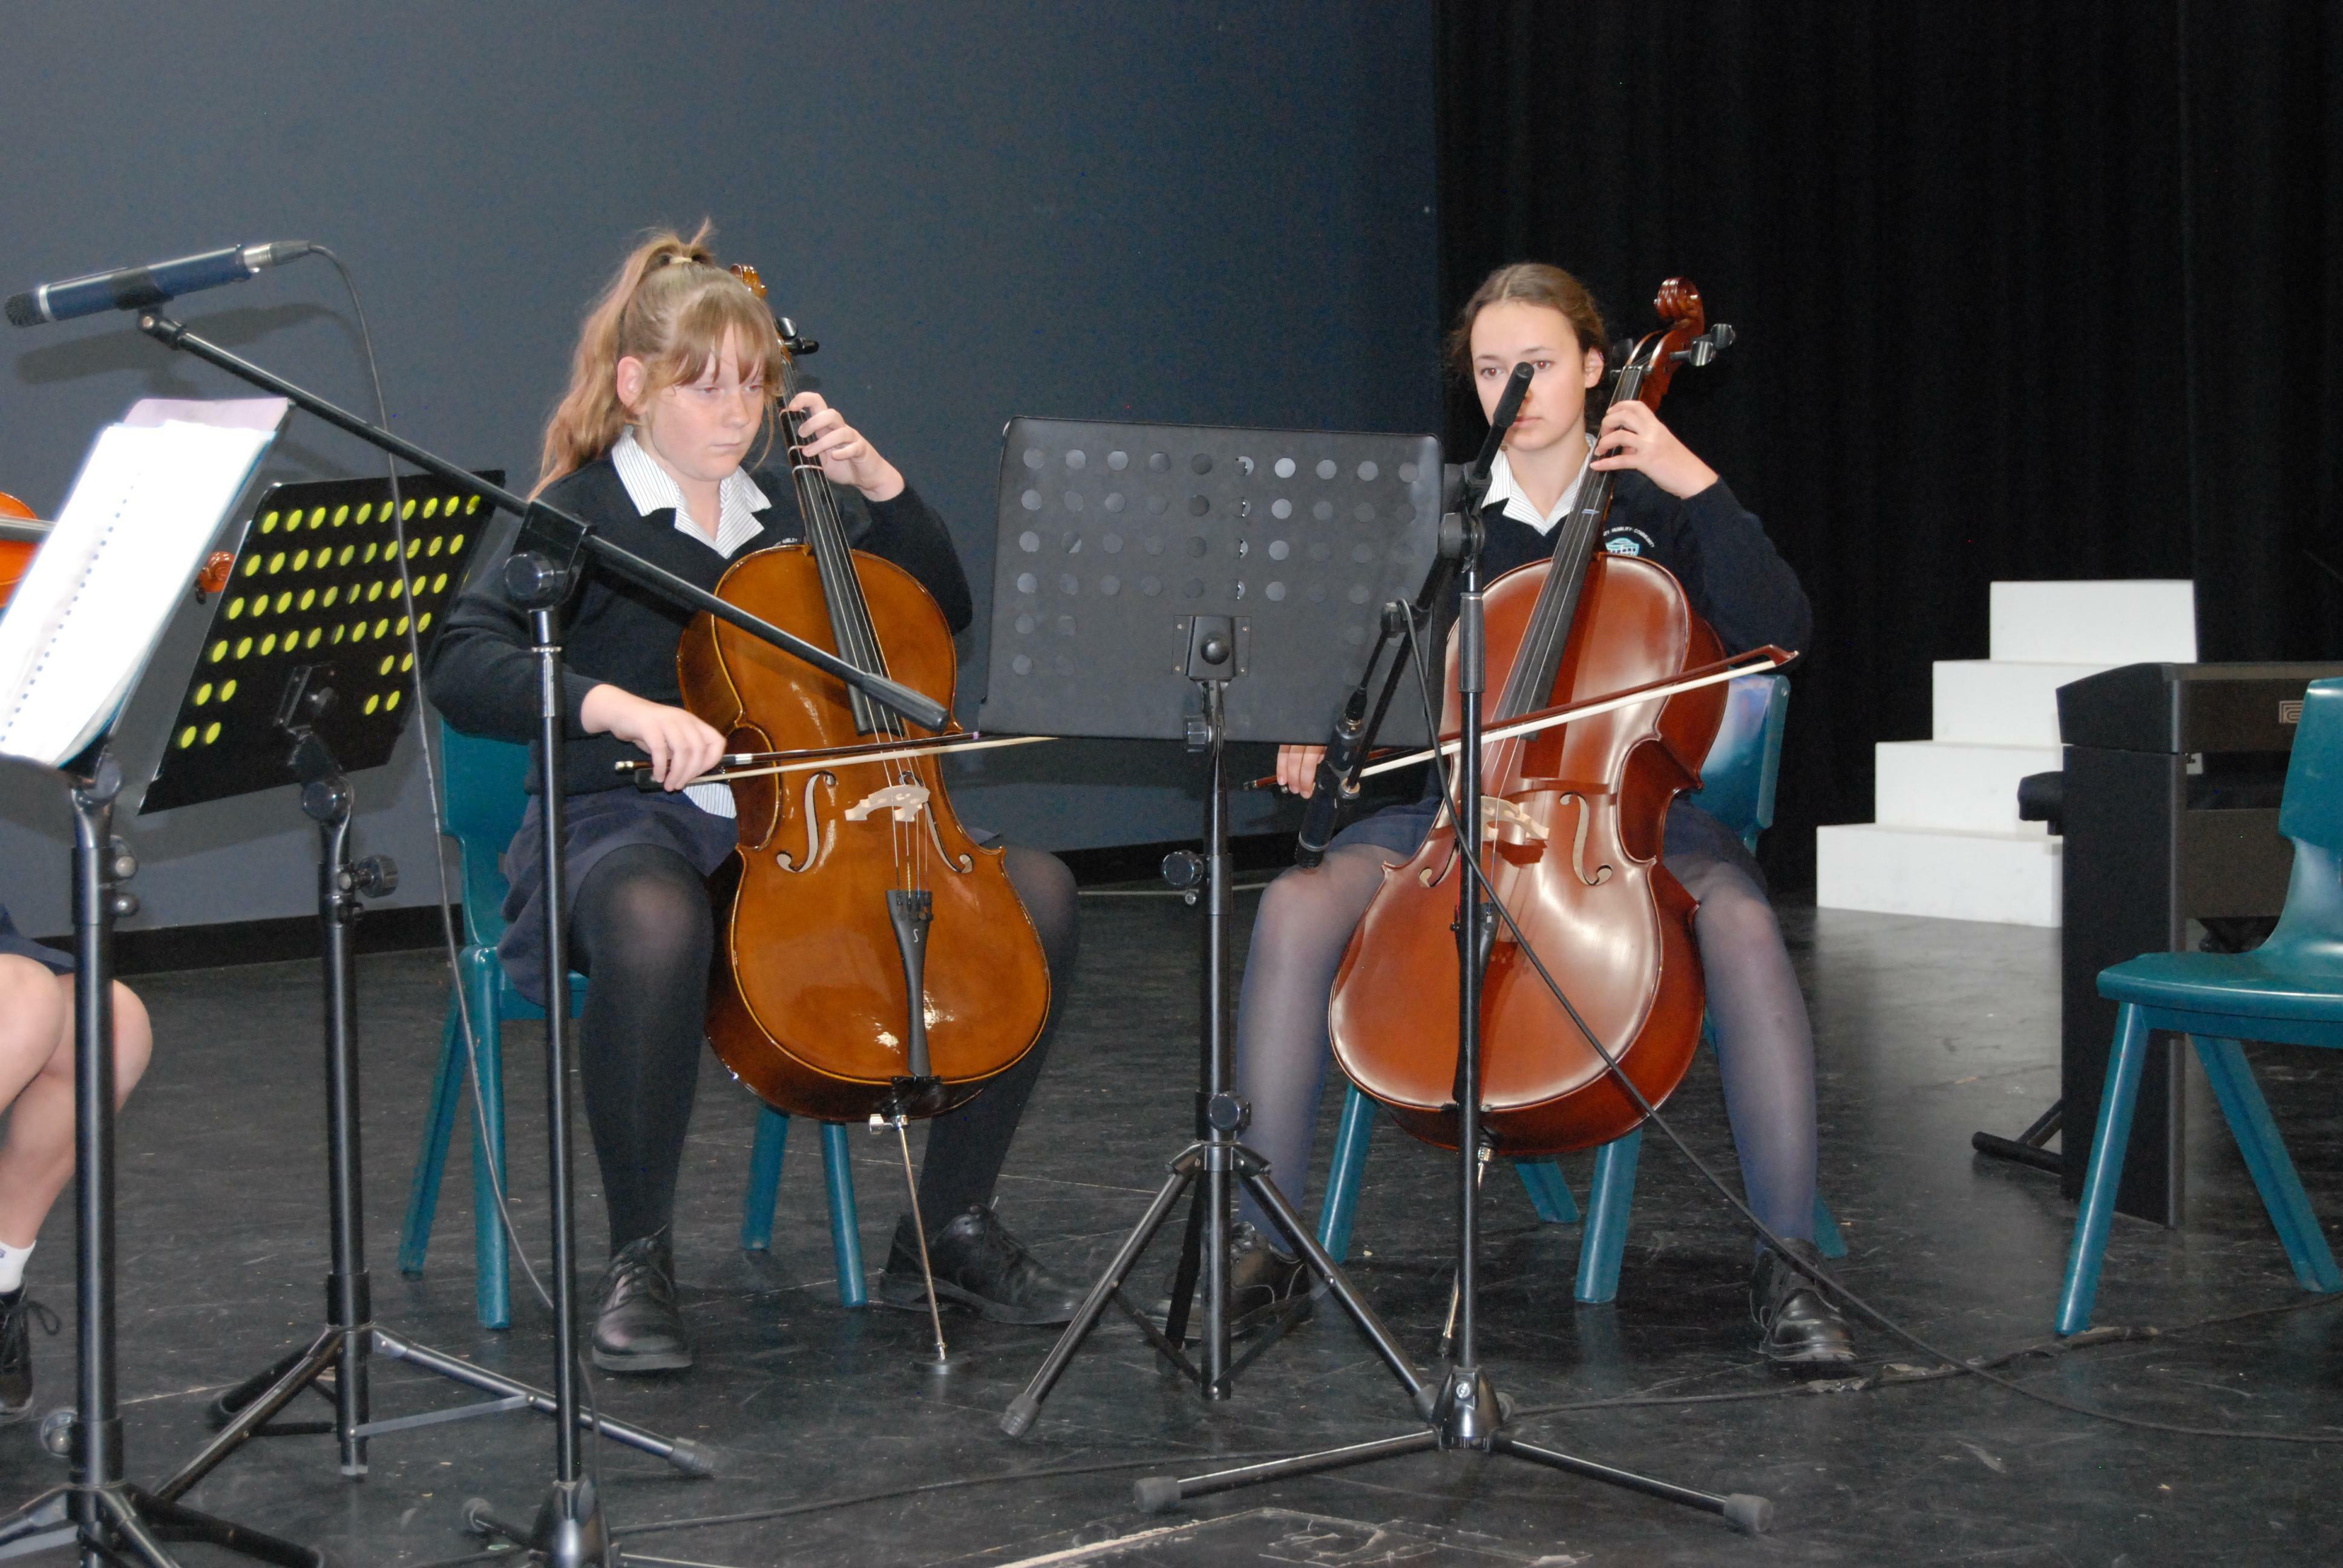 Musical performances assembly11